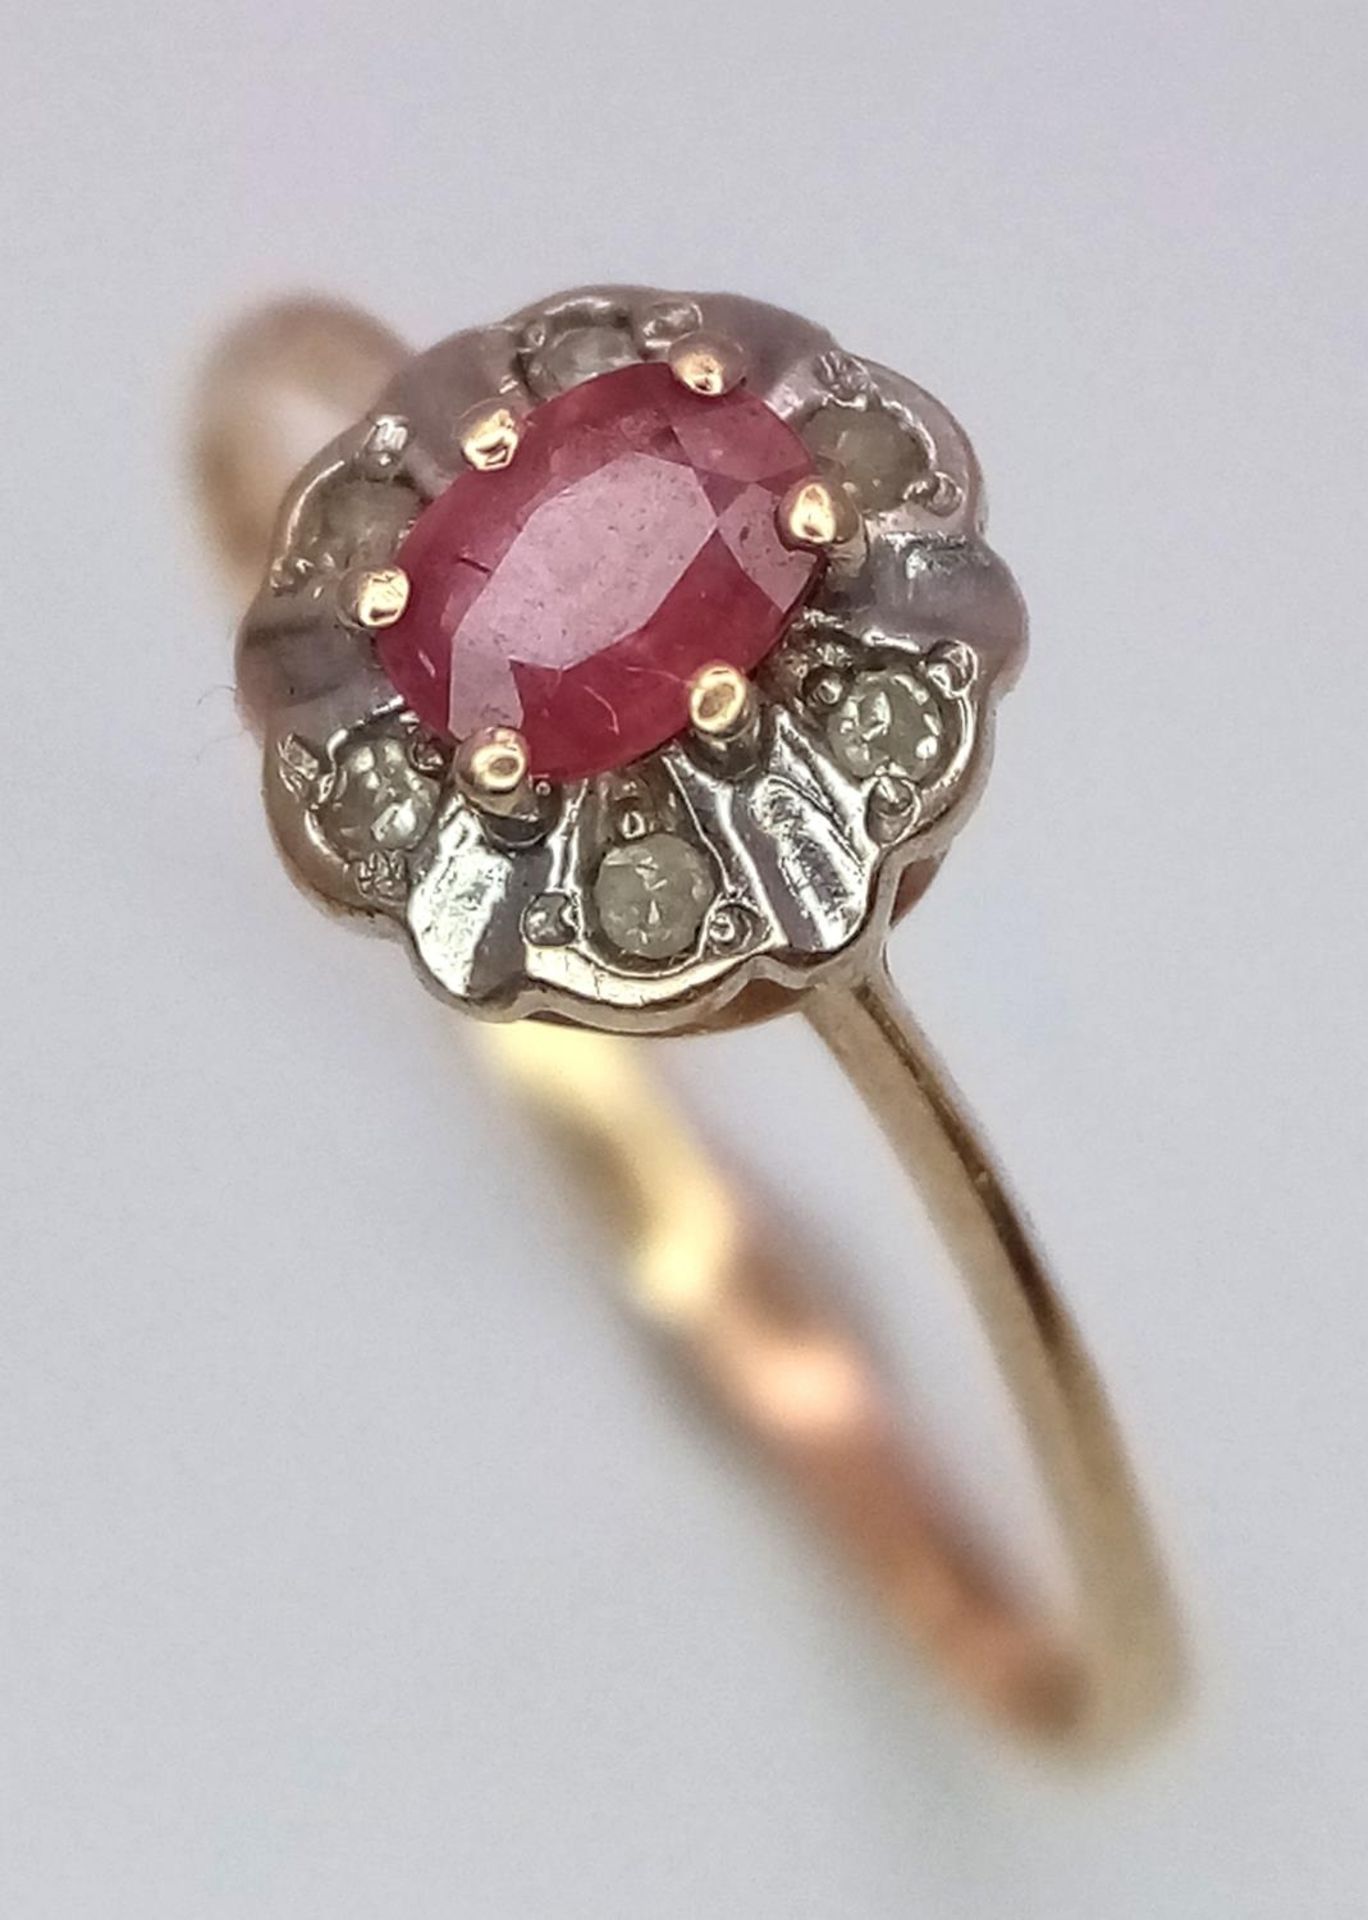 A 14K (TESTED) YELLOW GOLD DIAMOND & RUBY RING. Size K, 0.9g total weight. Ref: SC 9032 - Image 3 of 5